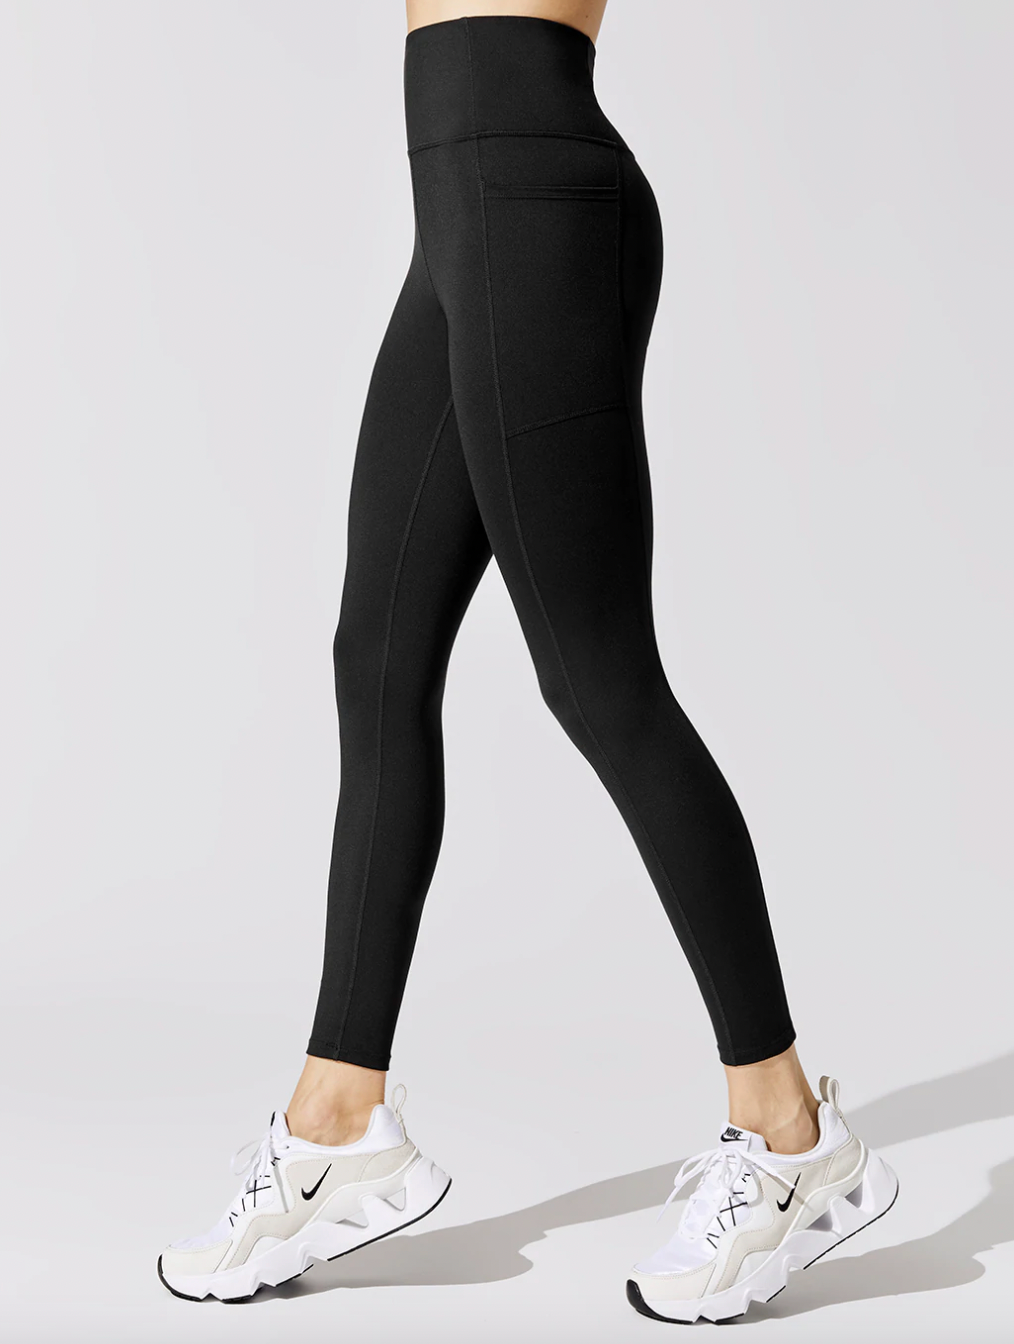 Carbon38 High Rise Legging With Pockets in Cloud Compression